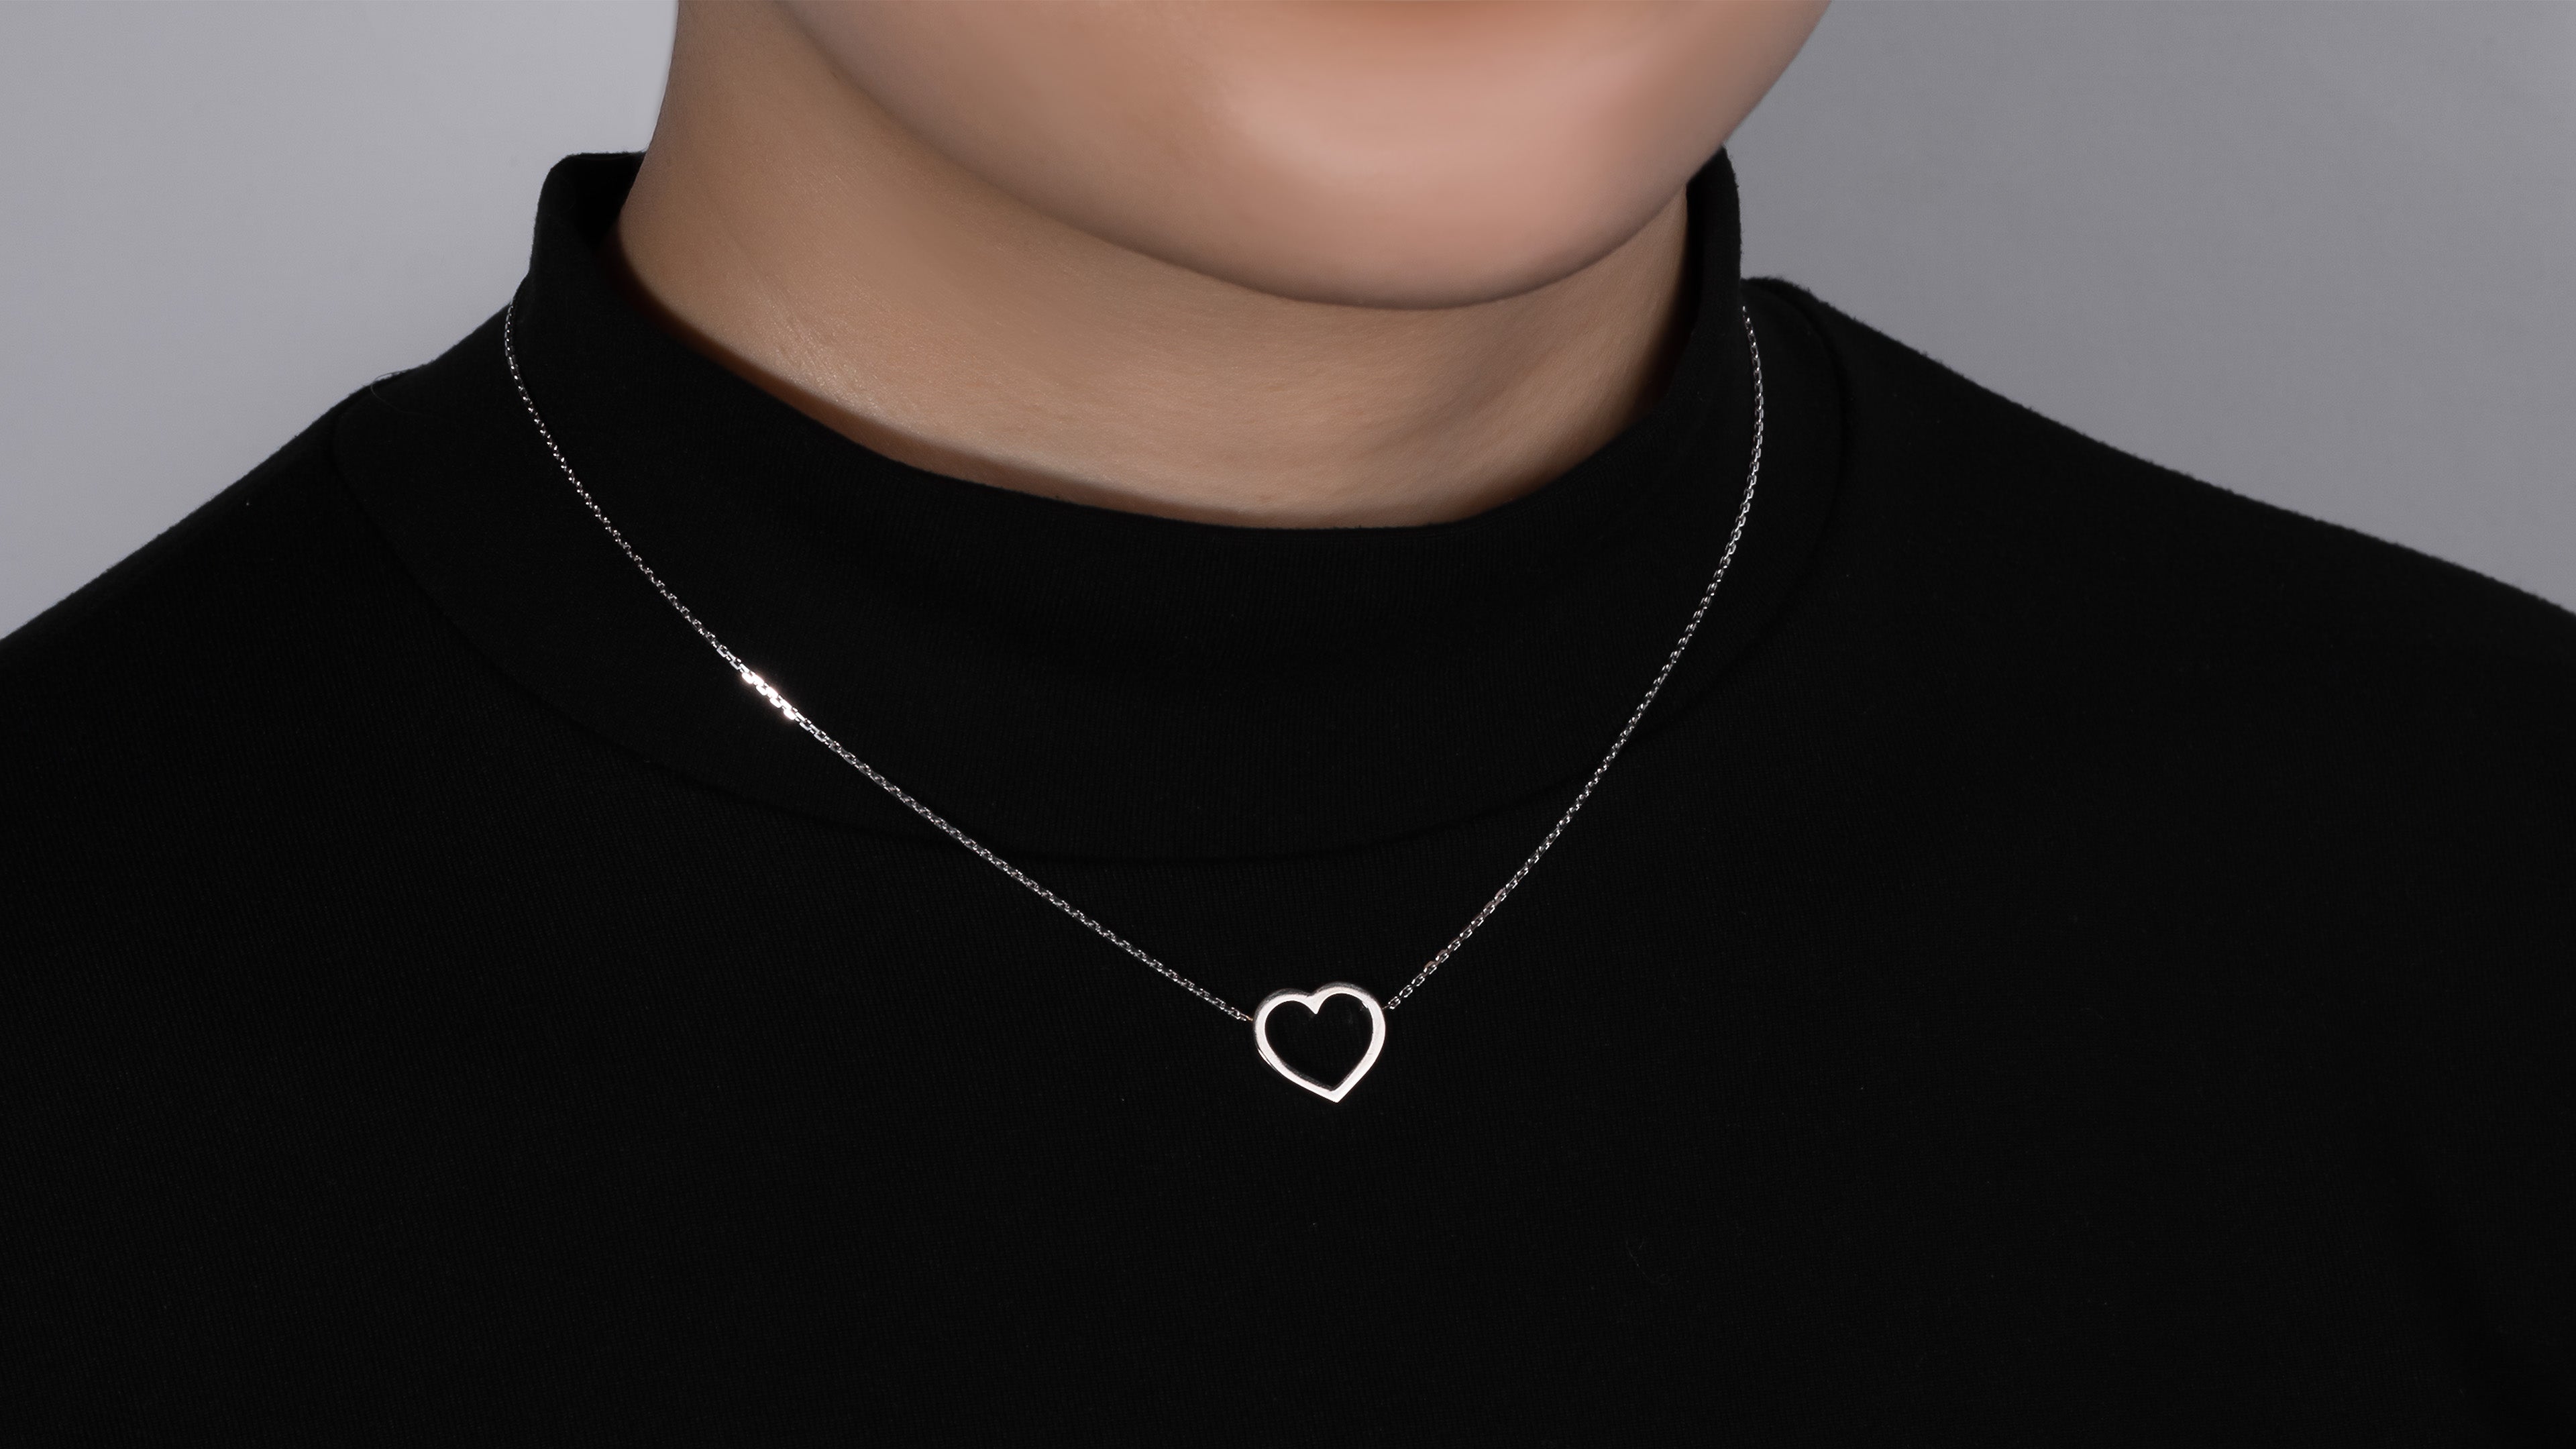 Buy Saint Laurent Crystal See Through Heart Clover Necklace 'Oxidized  Silver/Crystal' - 671347 Y1526 8368 | GOAT